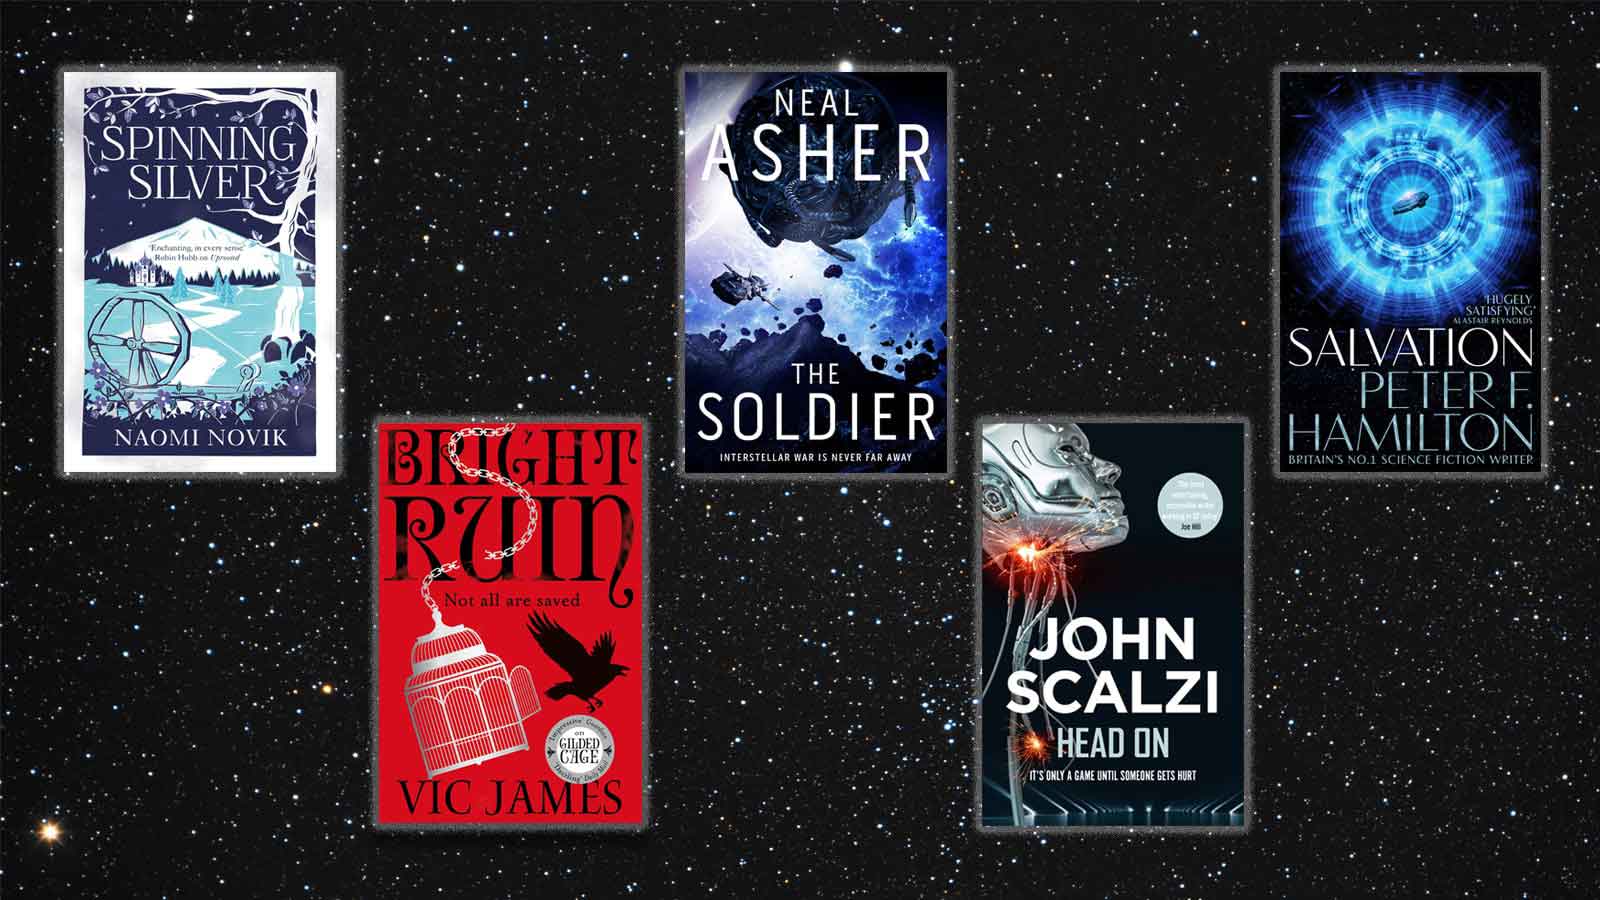 Covers of the 6 books: Spinning Silver, Bright Ruin, the Soldier, Head On and Salvation, on a background of stars